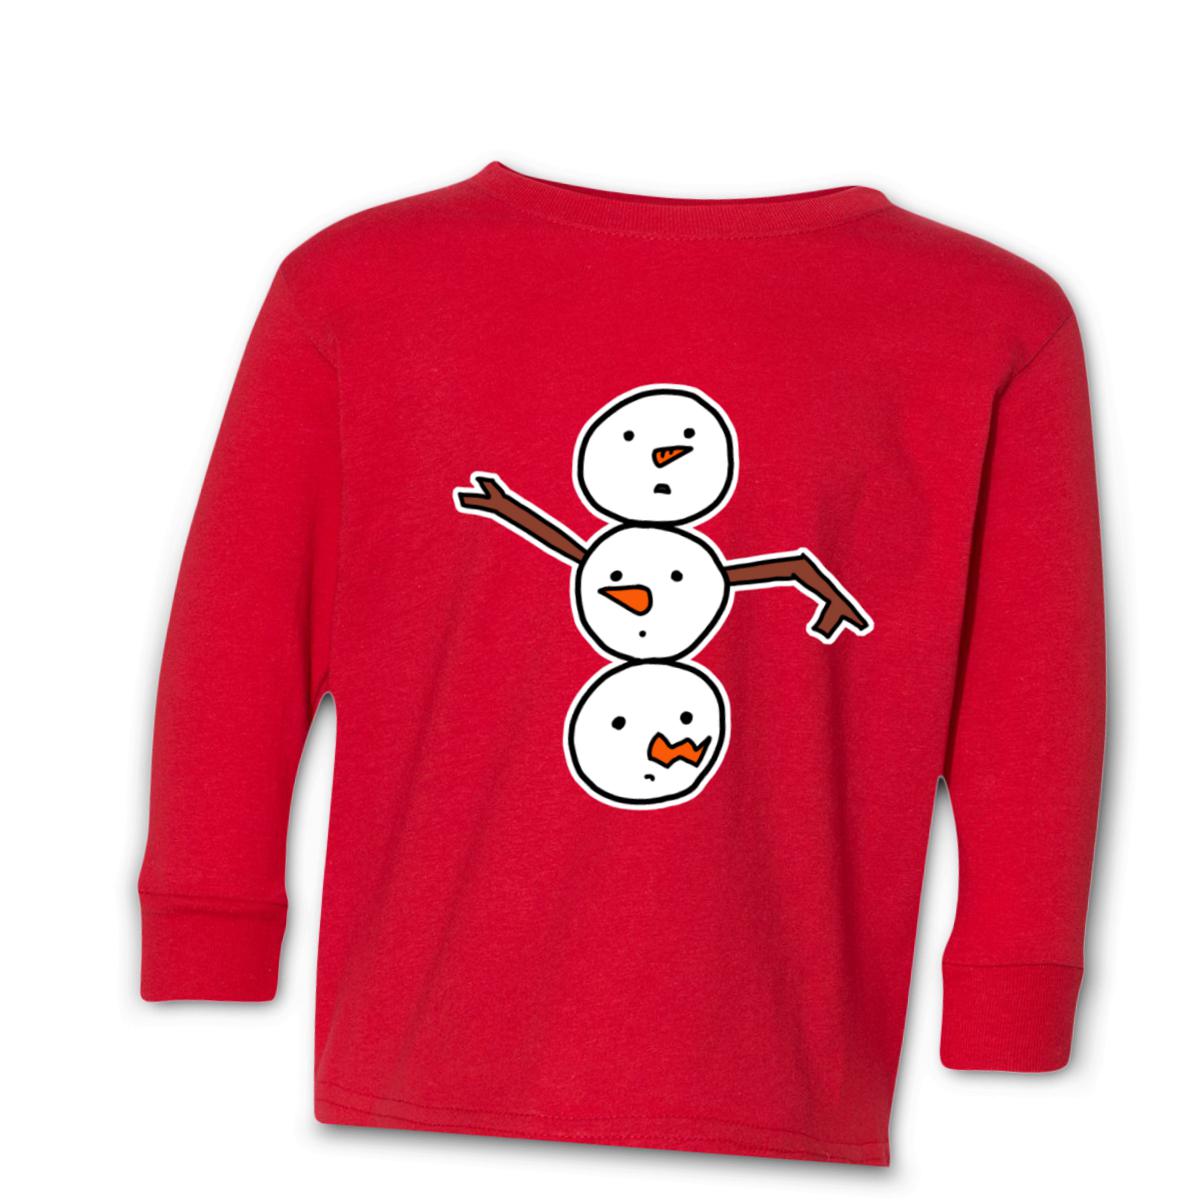 Snowman All Heads Toddler Long Sleeve Tee 4T red